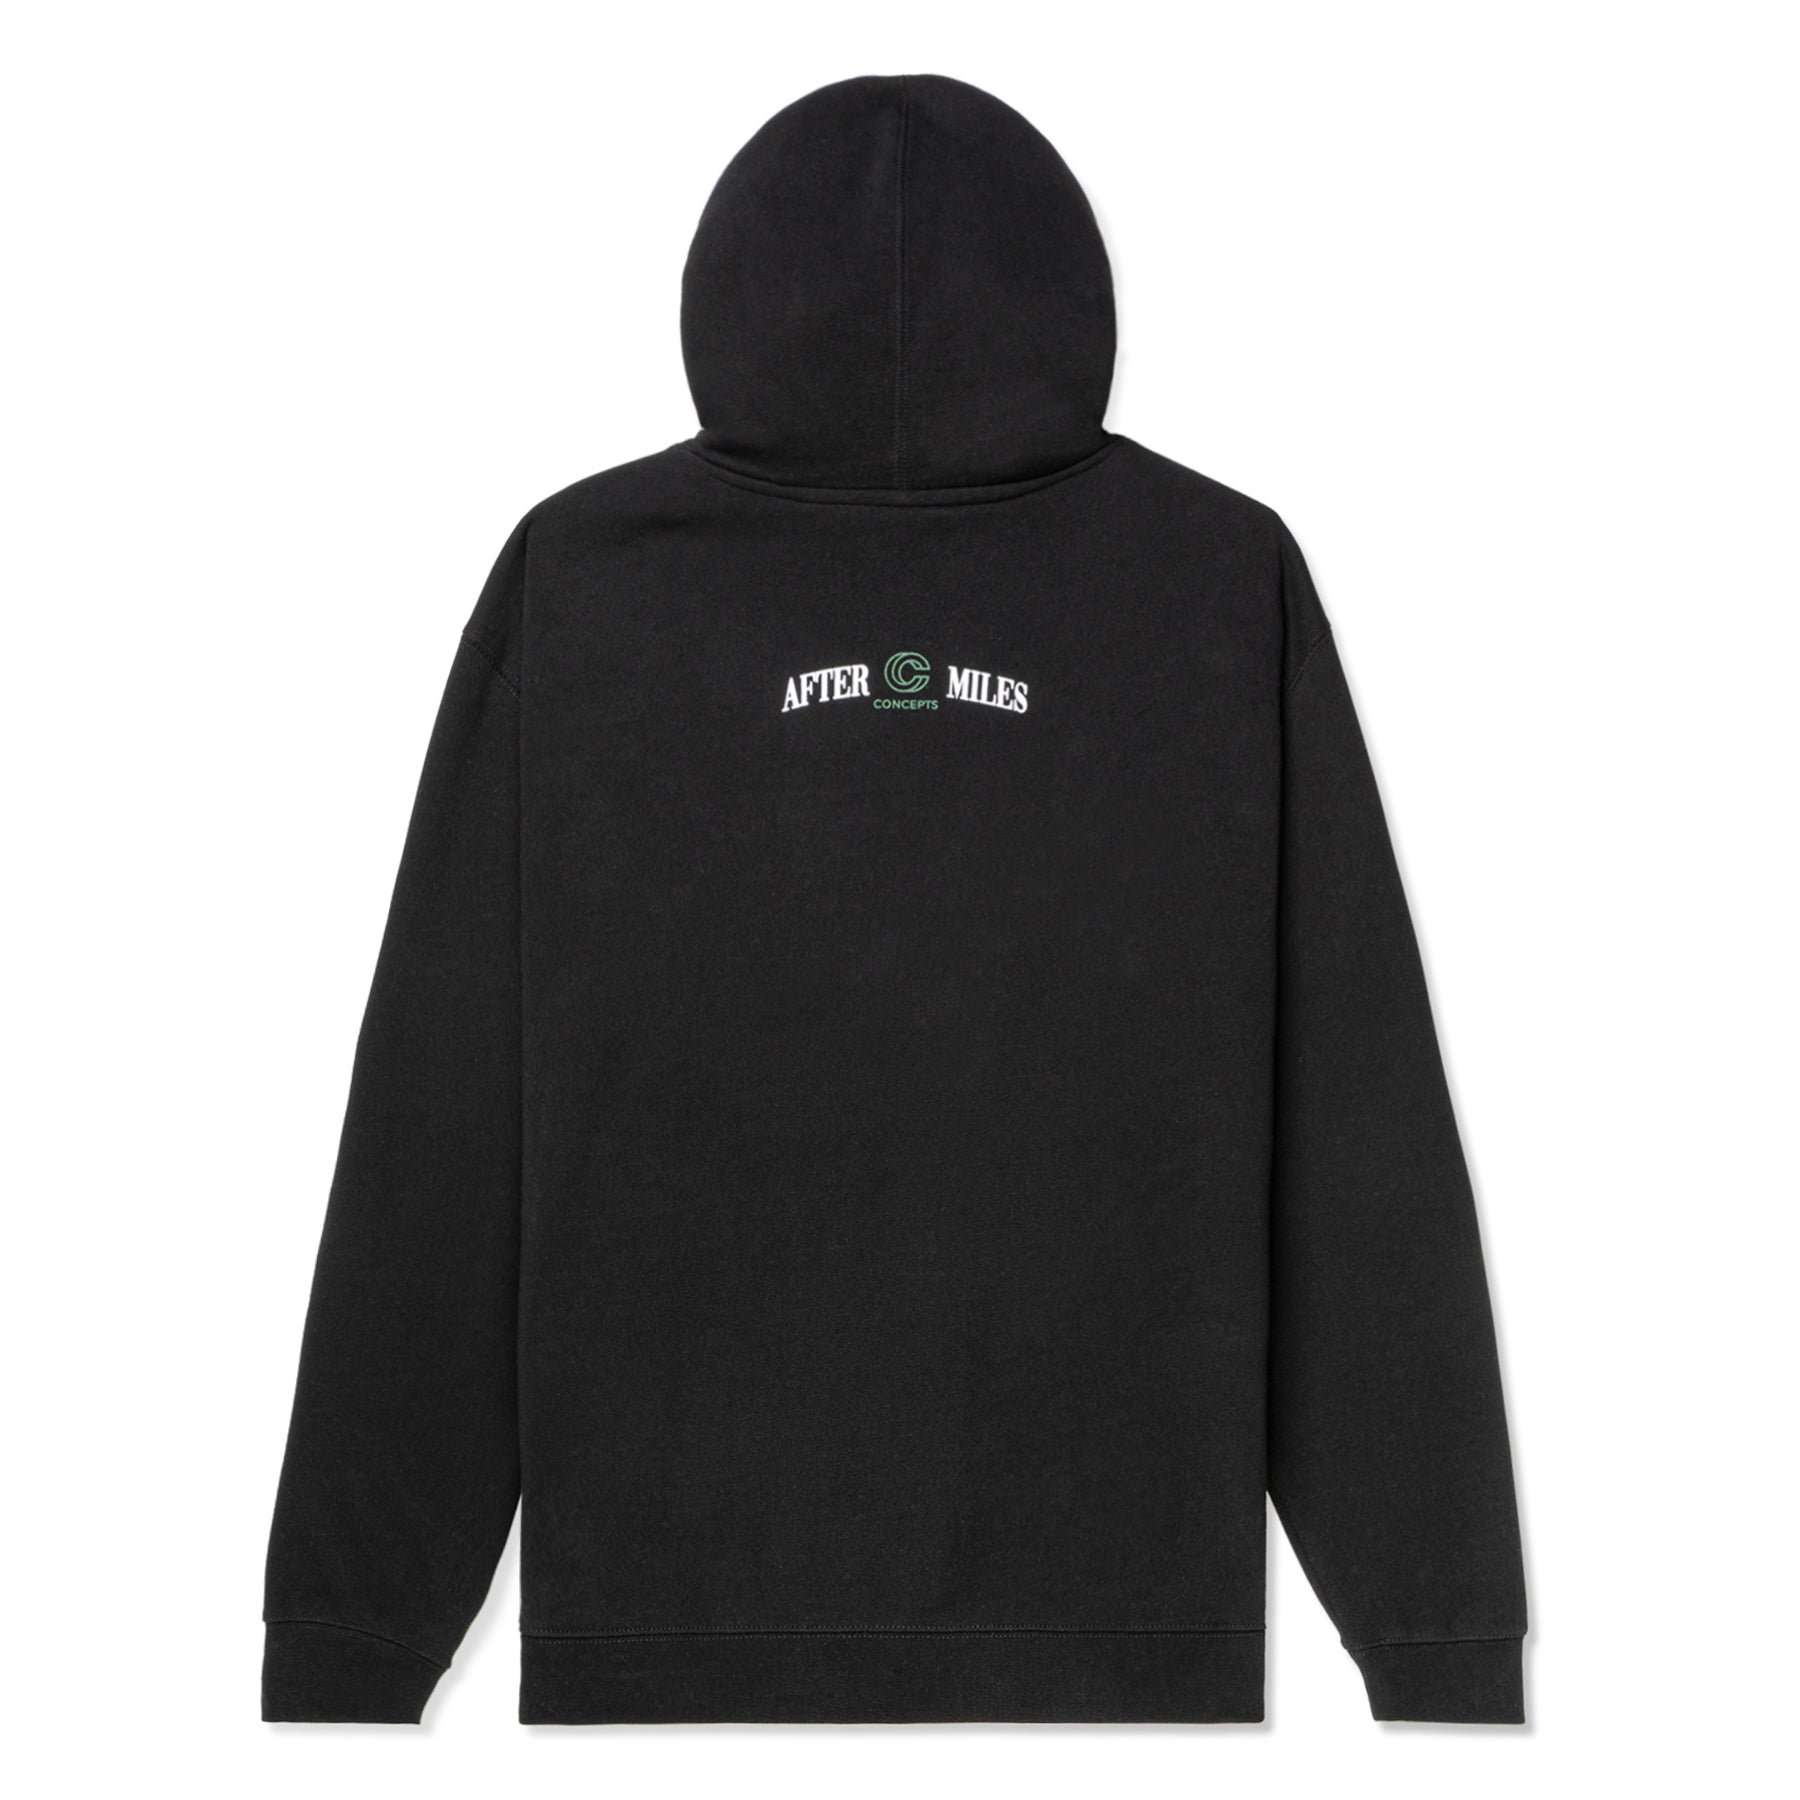 Concepts x After Miles Hooded Sweatshirt (Black) – CNCPTS